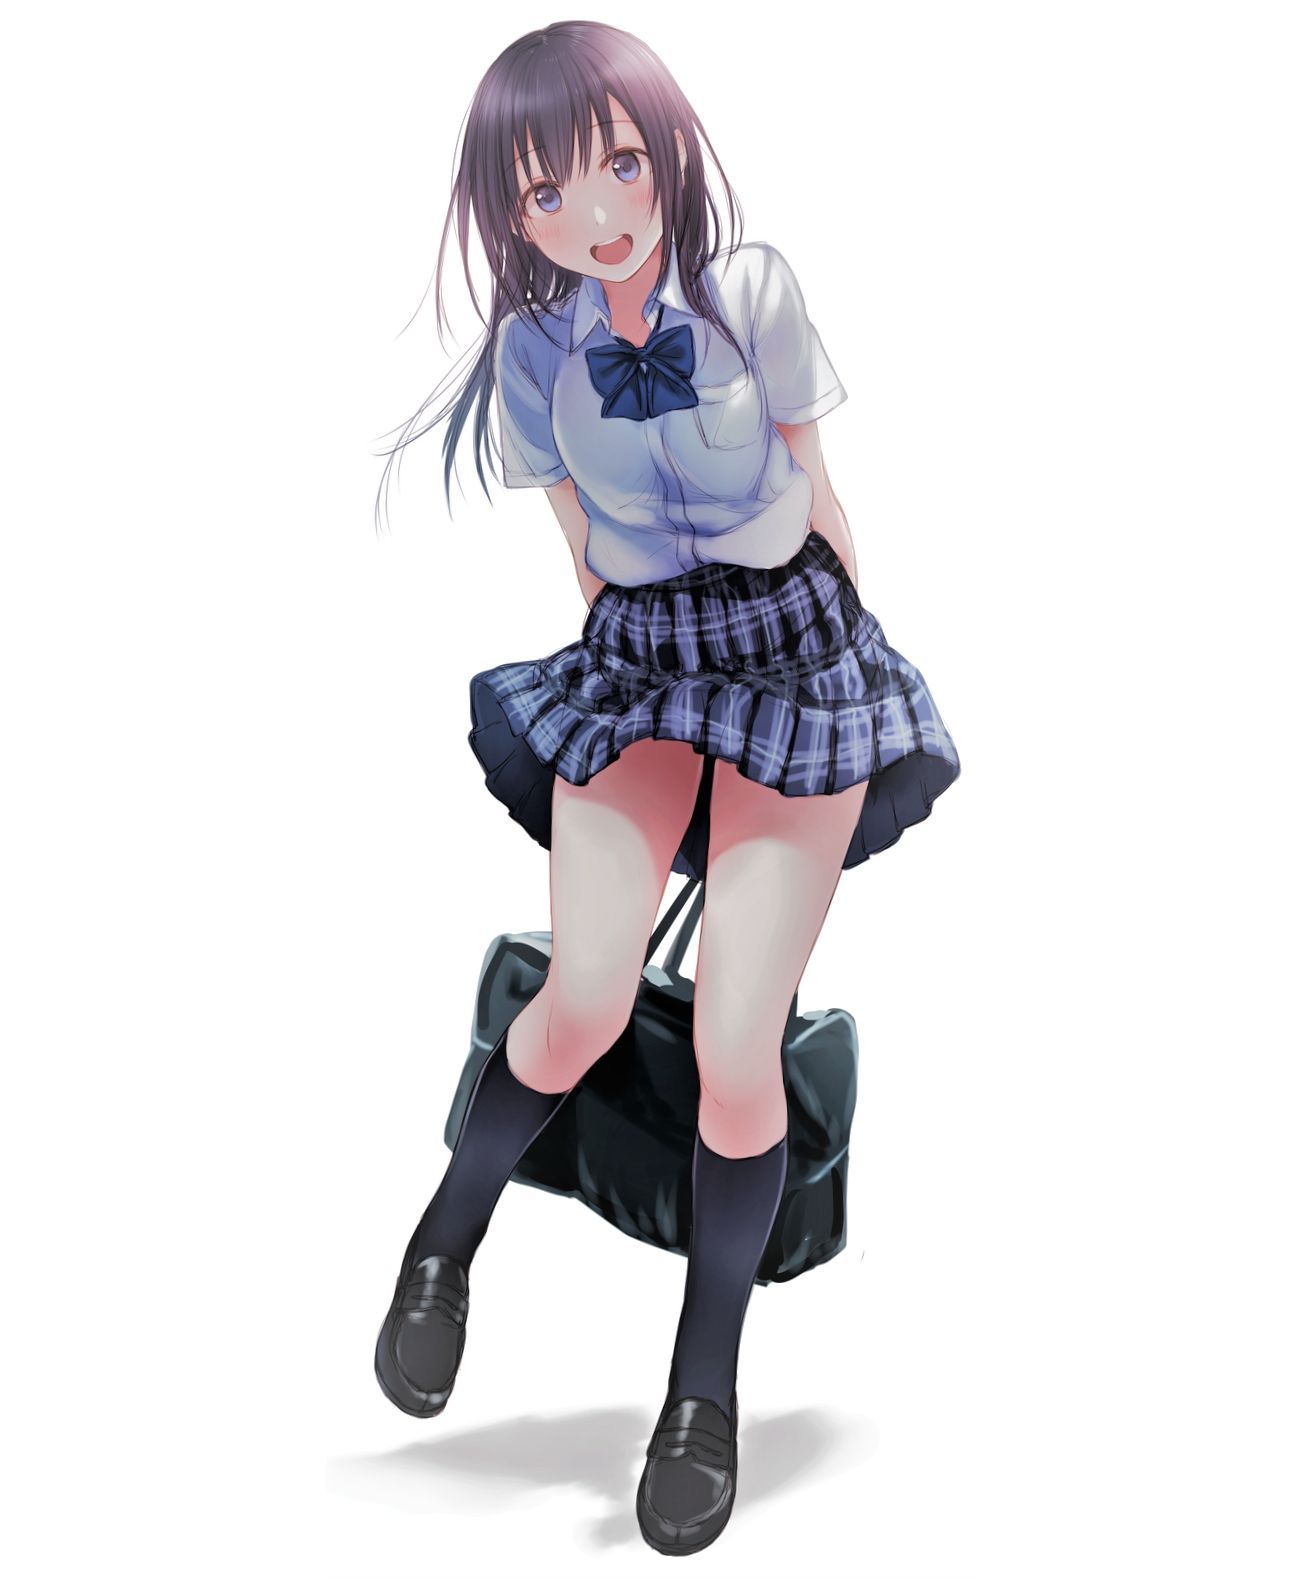 Image summary that is healed by seeing a girl in a slightly uniform 26